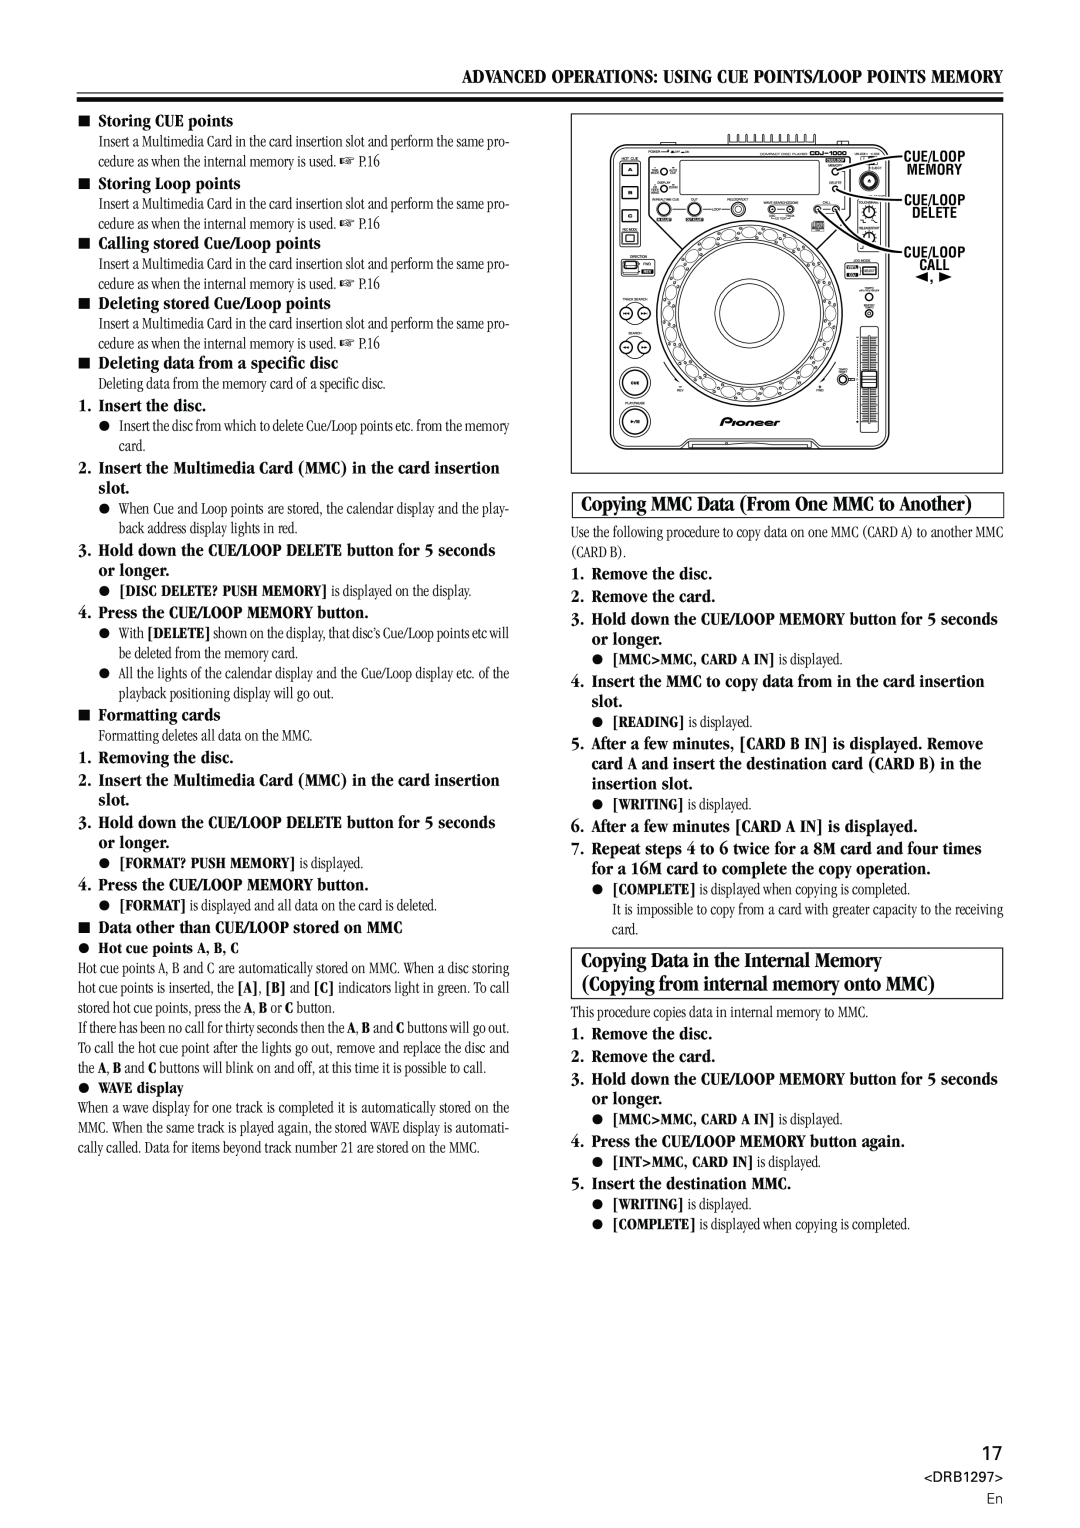 Pioneer CDJ-1000 operating instructions Copying MMC Data From One MMC to Another 